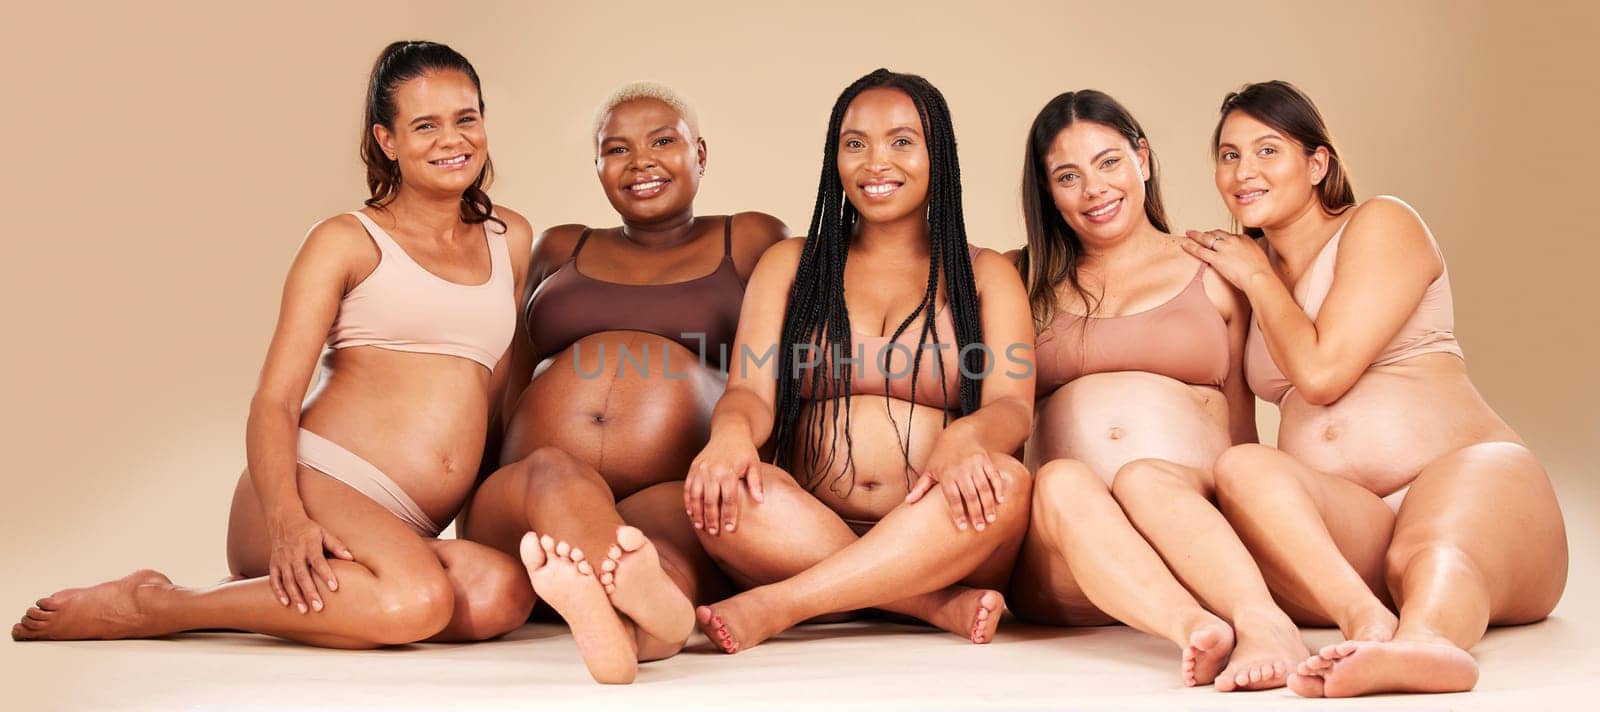 Portrait, group or pregnancy friends sitting in underwear in community bonding, diversity support or body empowerment. Happy smile, floor or pregnant women in healthcare wellness, future baby or love.